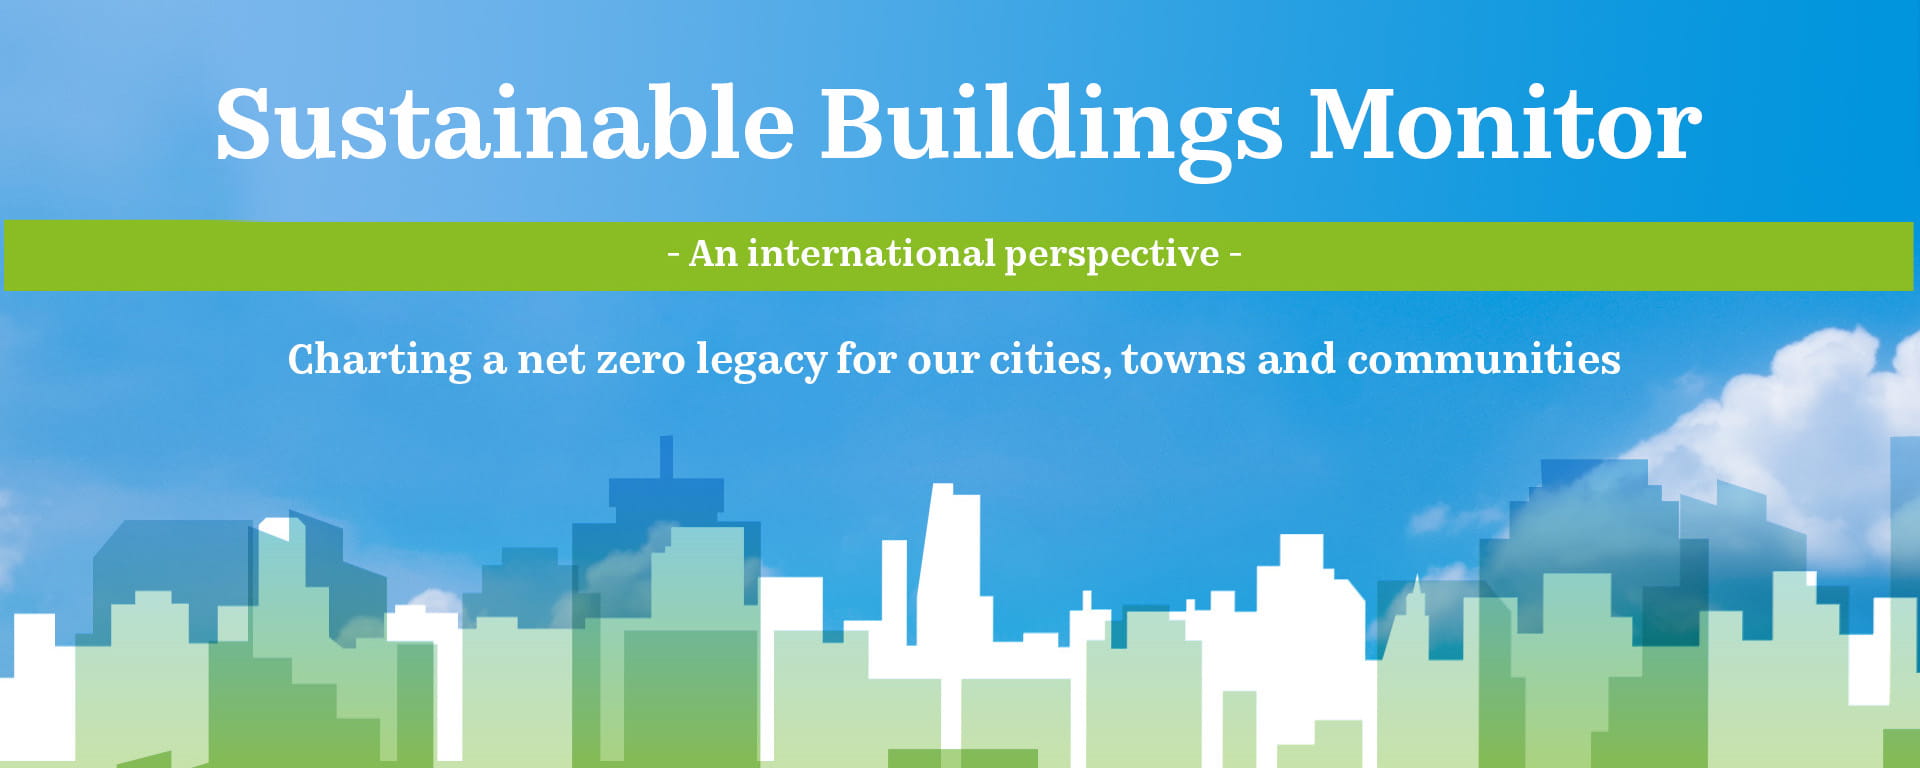 Sustainable Buildings Monitor | ISG